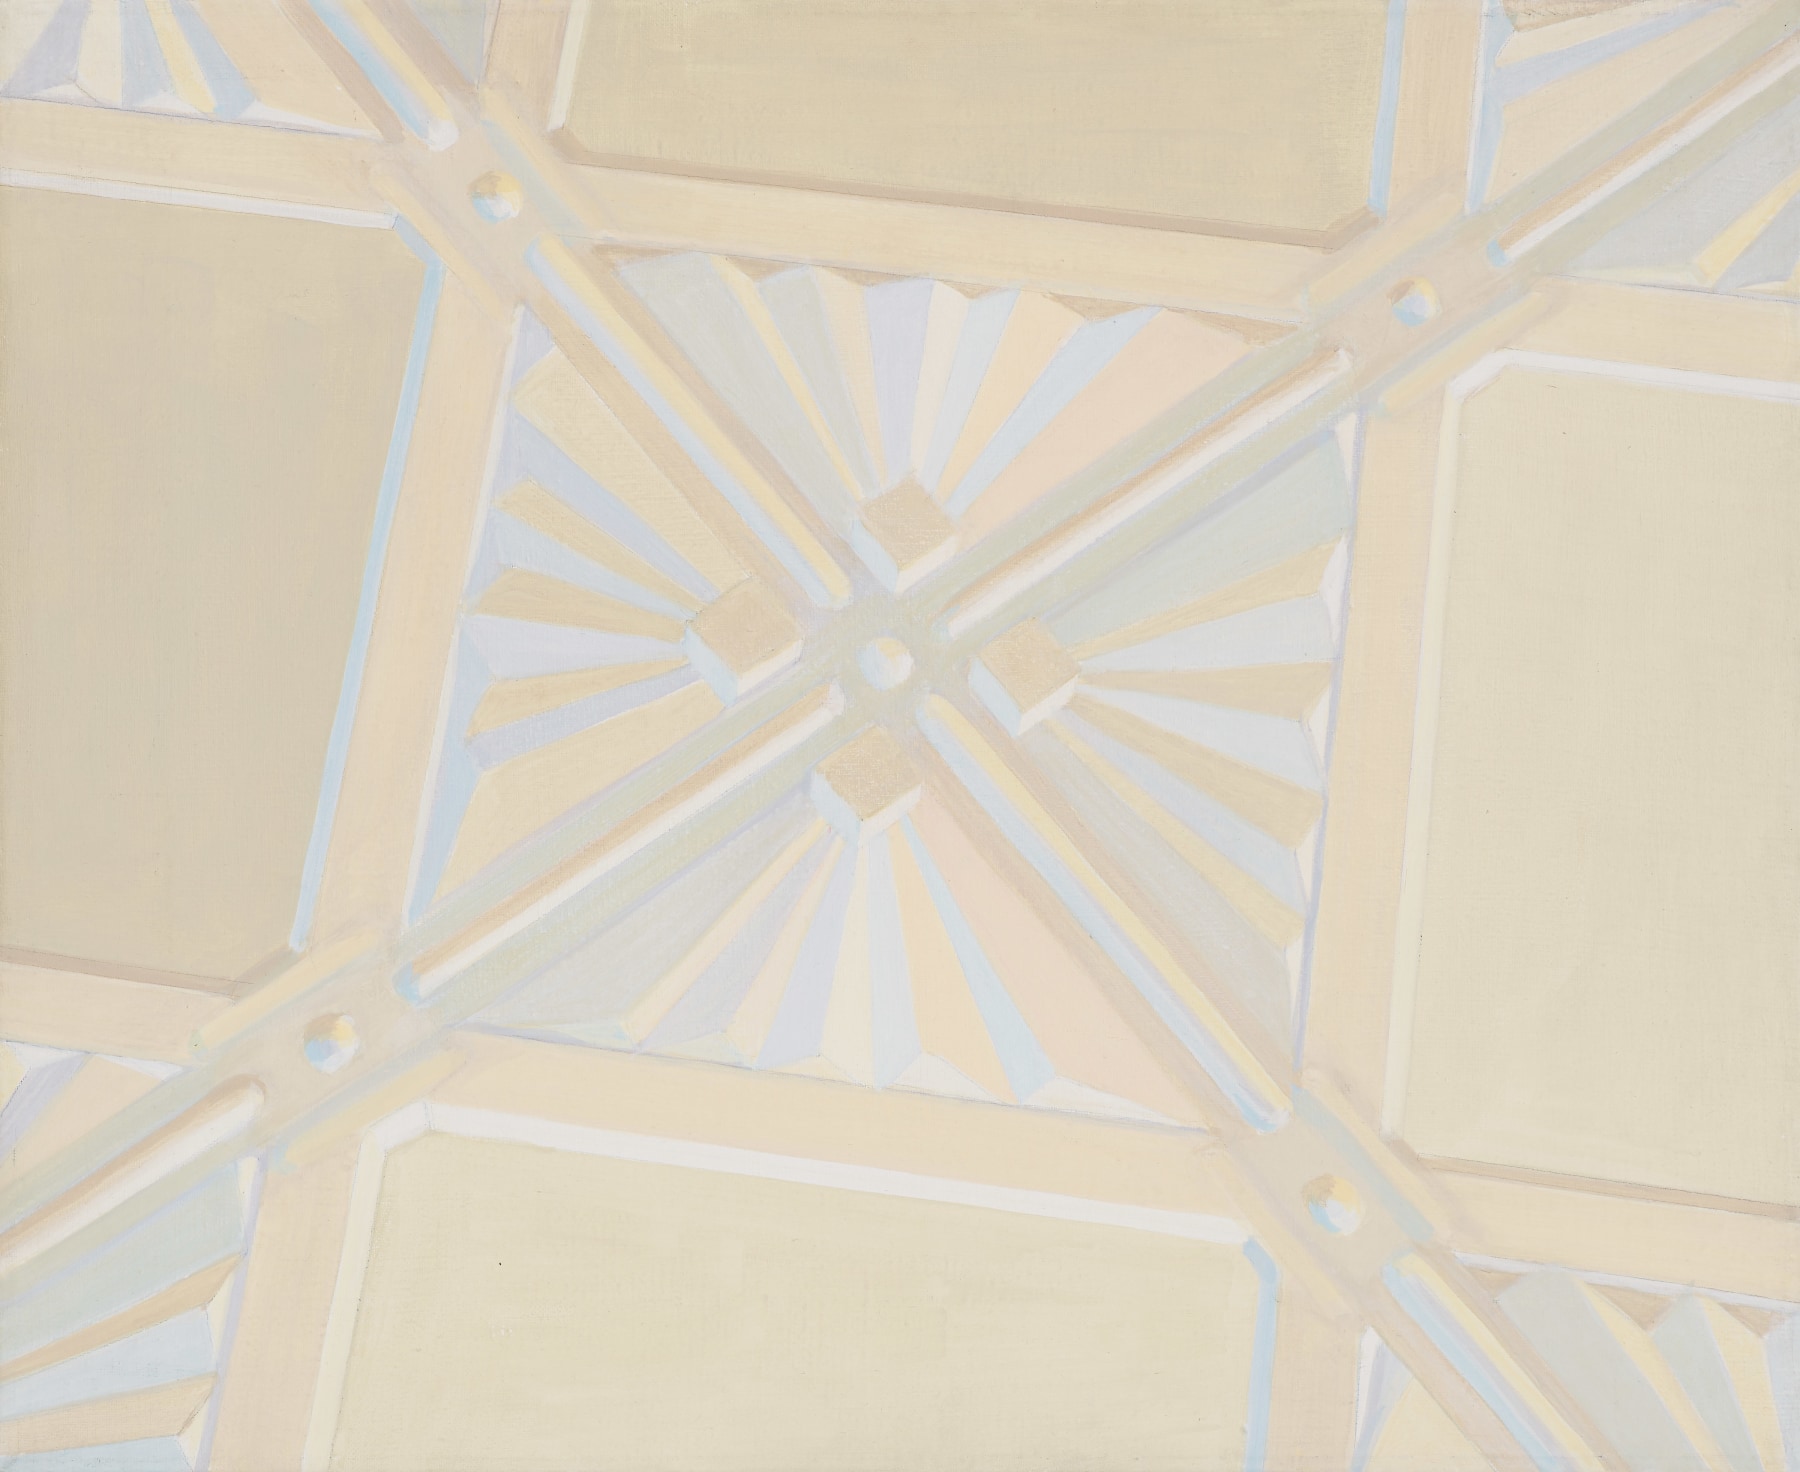 Detail of Ceiling, 1969. Acrylic on canvas 18 x 22 inches